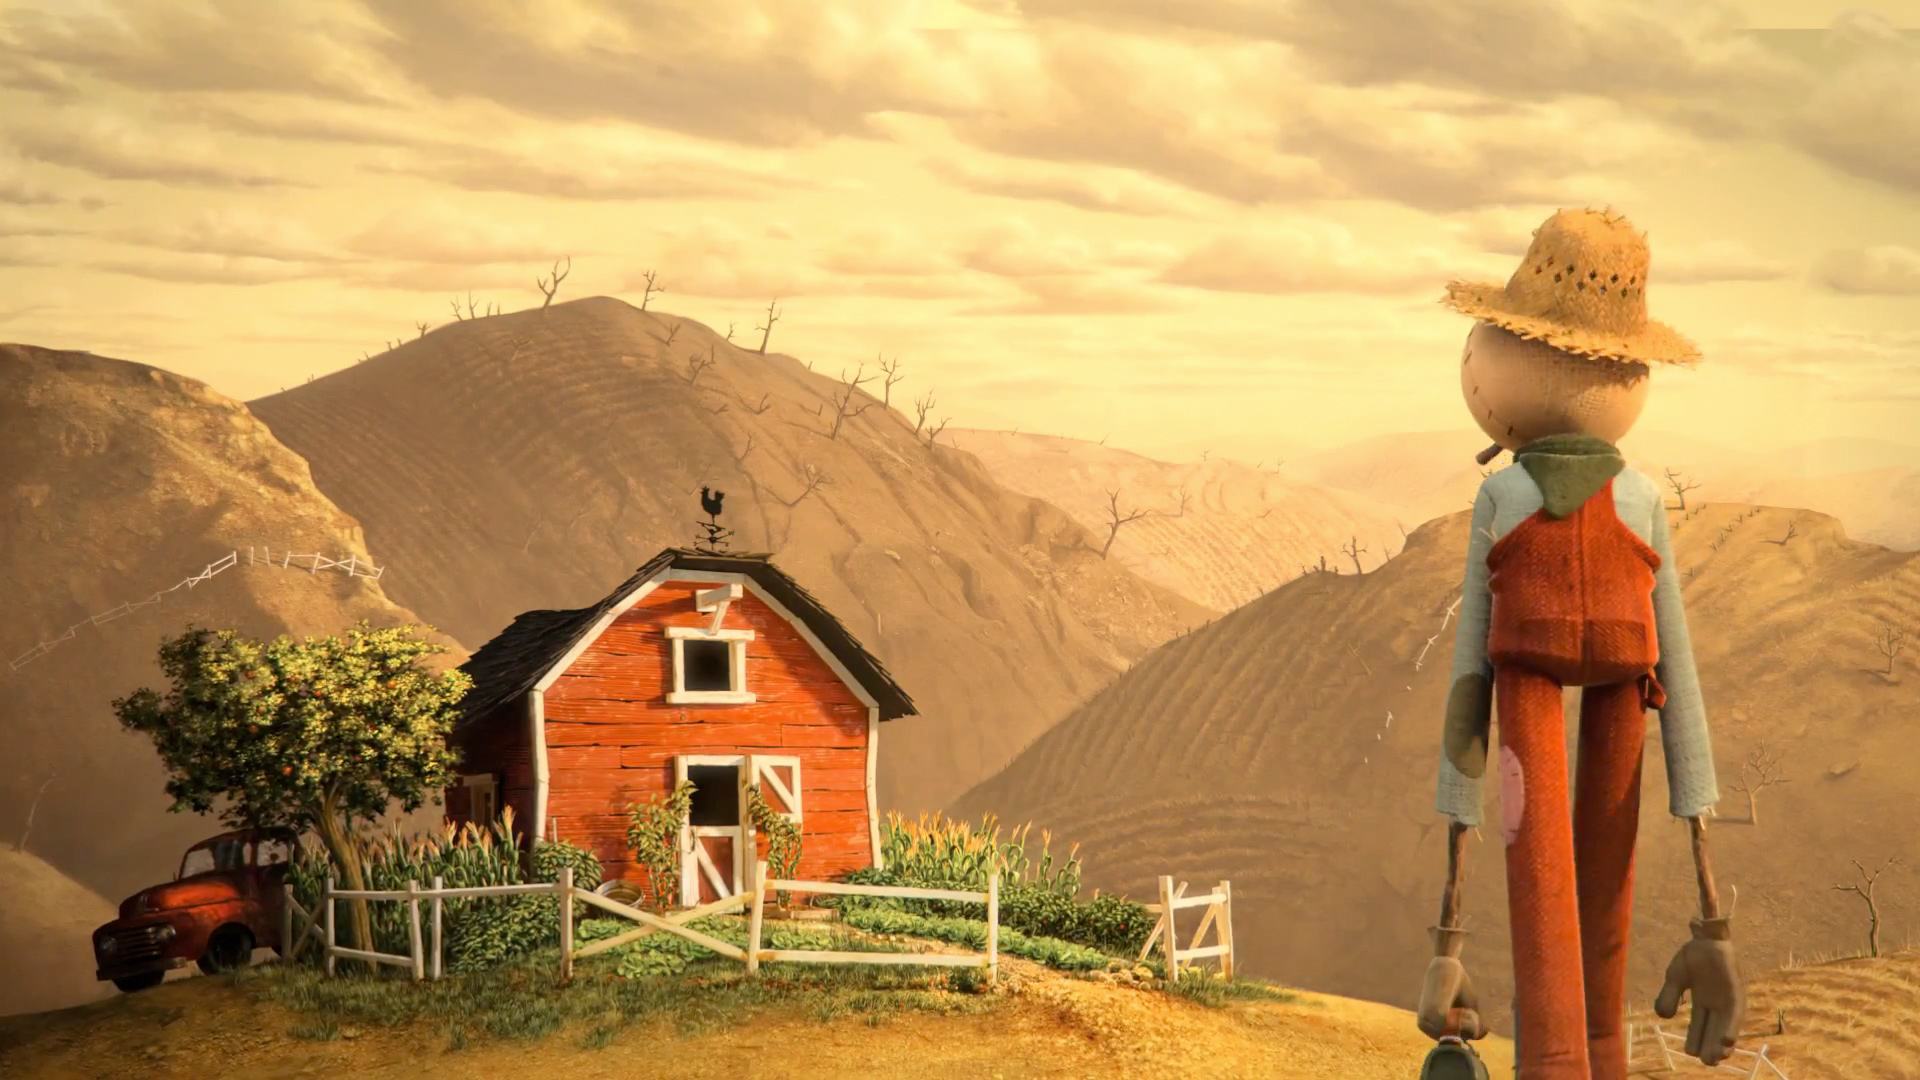 chipotle-creates-great-animated-short-film-the-scarecrow-16.jpg